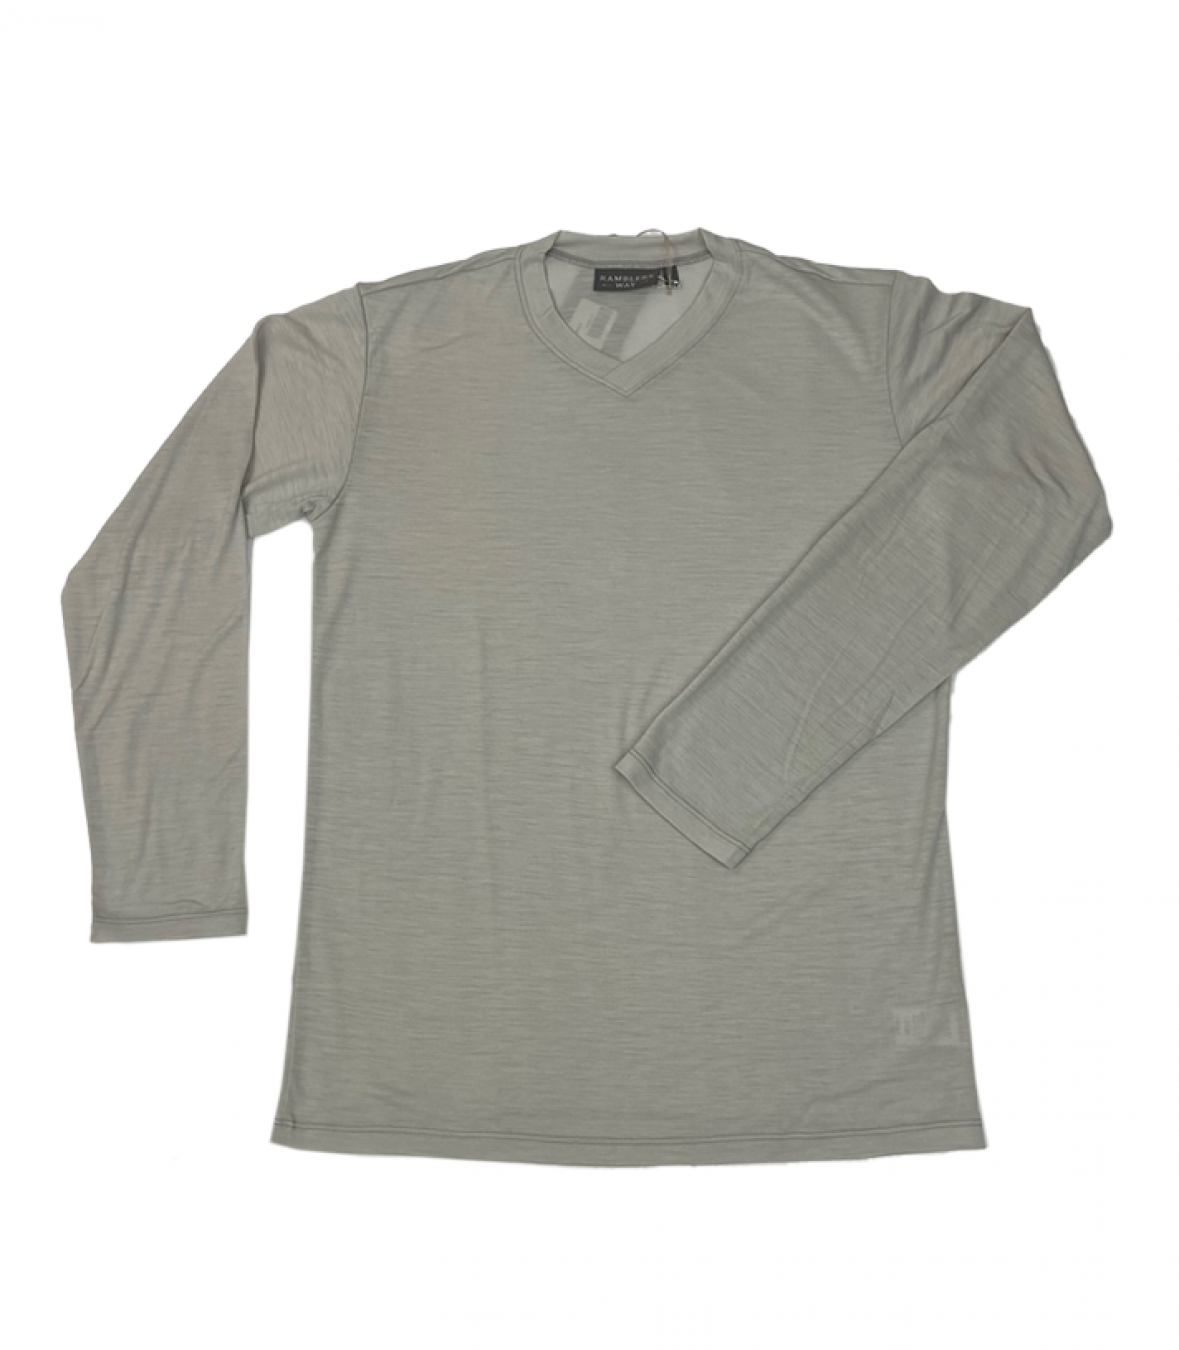 Wool Cross Neck LS - Additional Colors Made in USA | RAMBLERS WAY